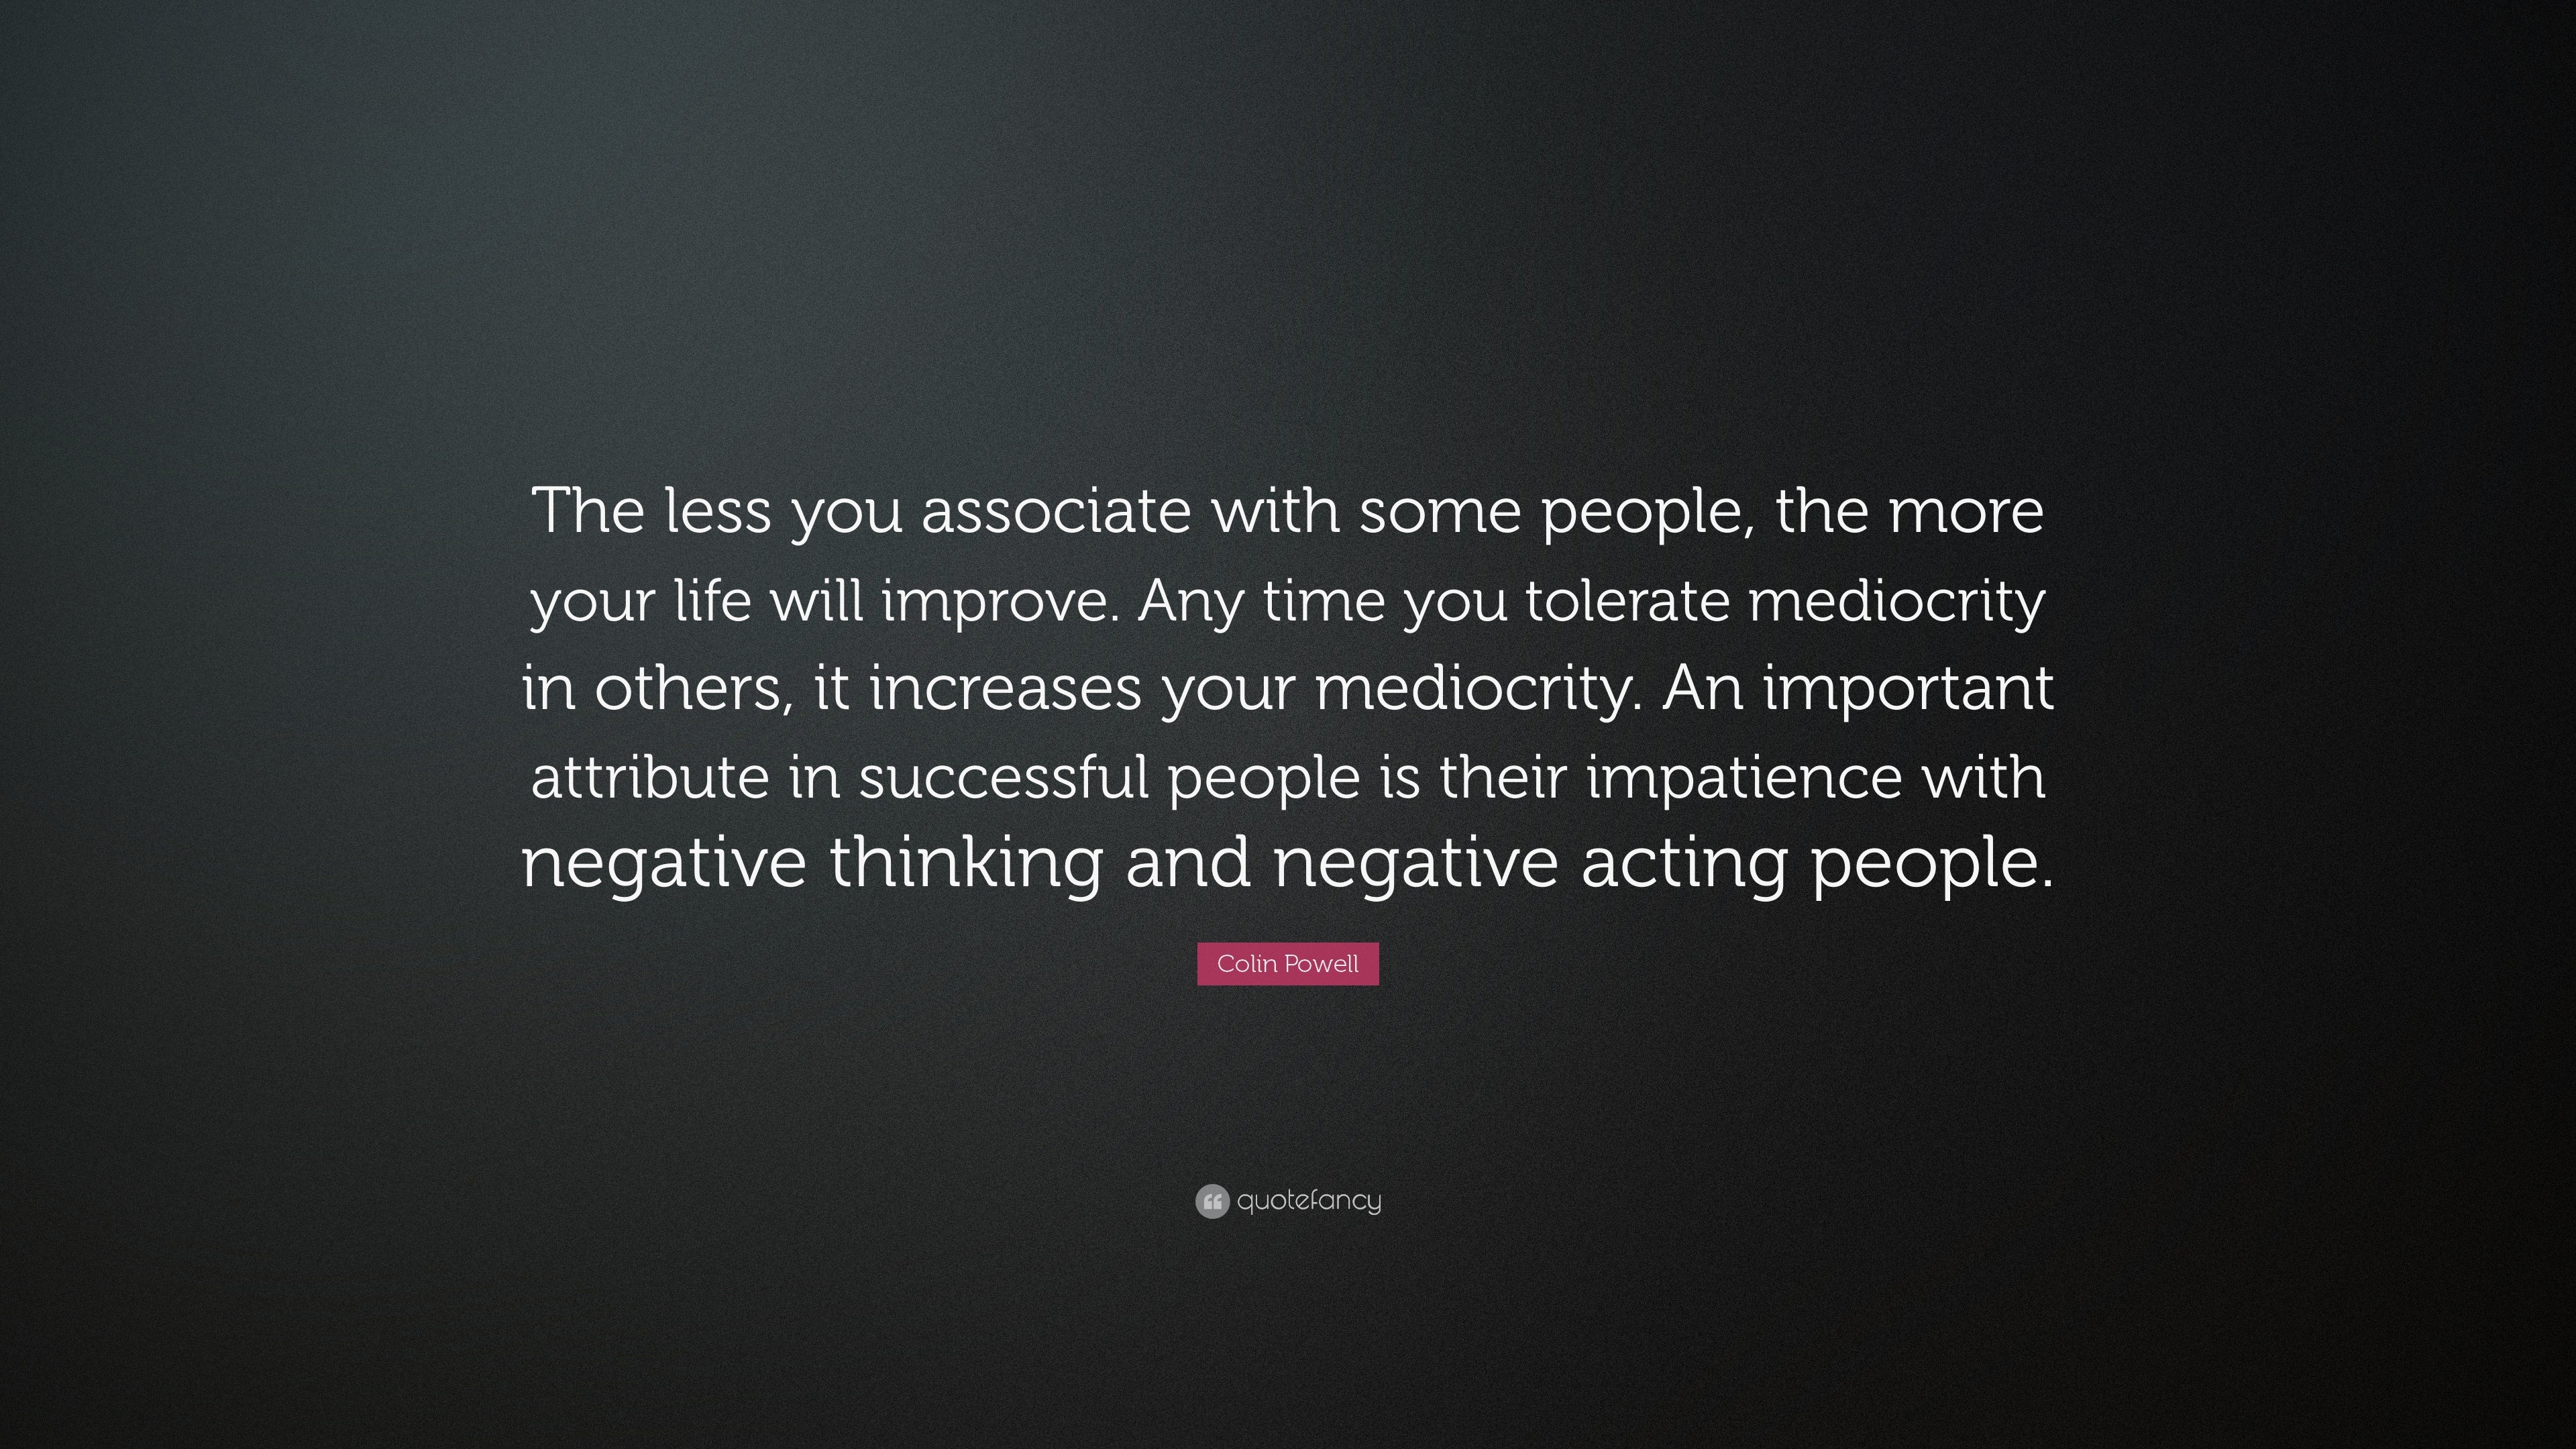 Colin Powell Quote “The less you associate with some people the more your